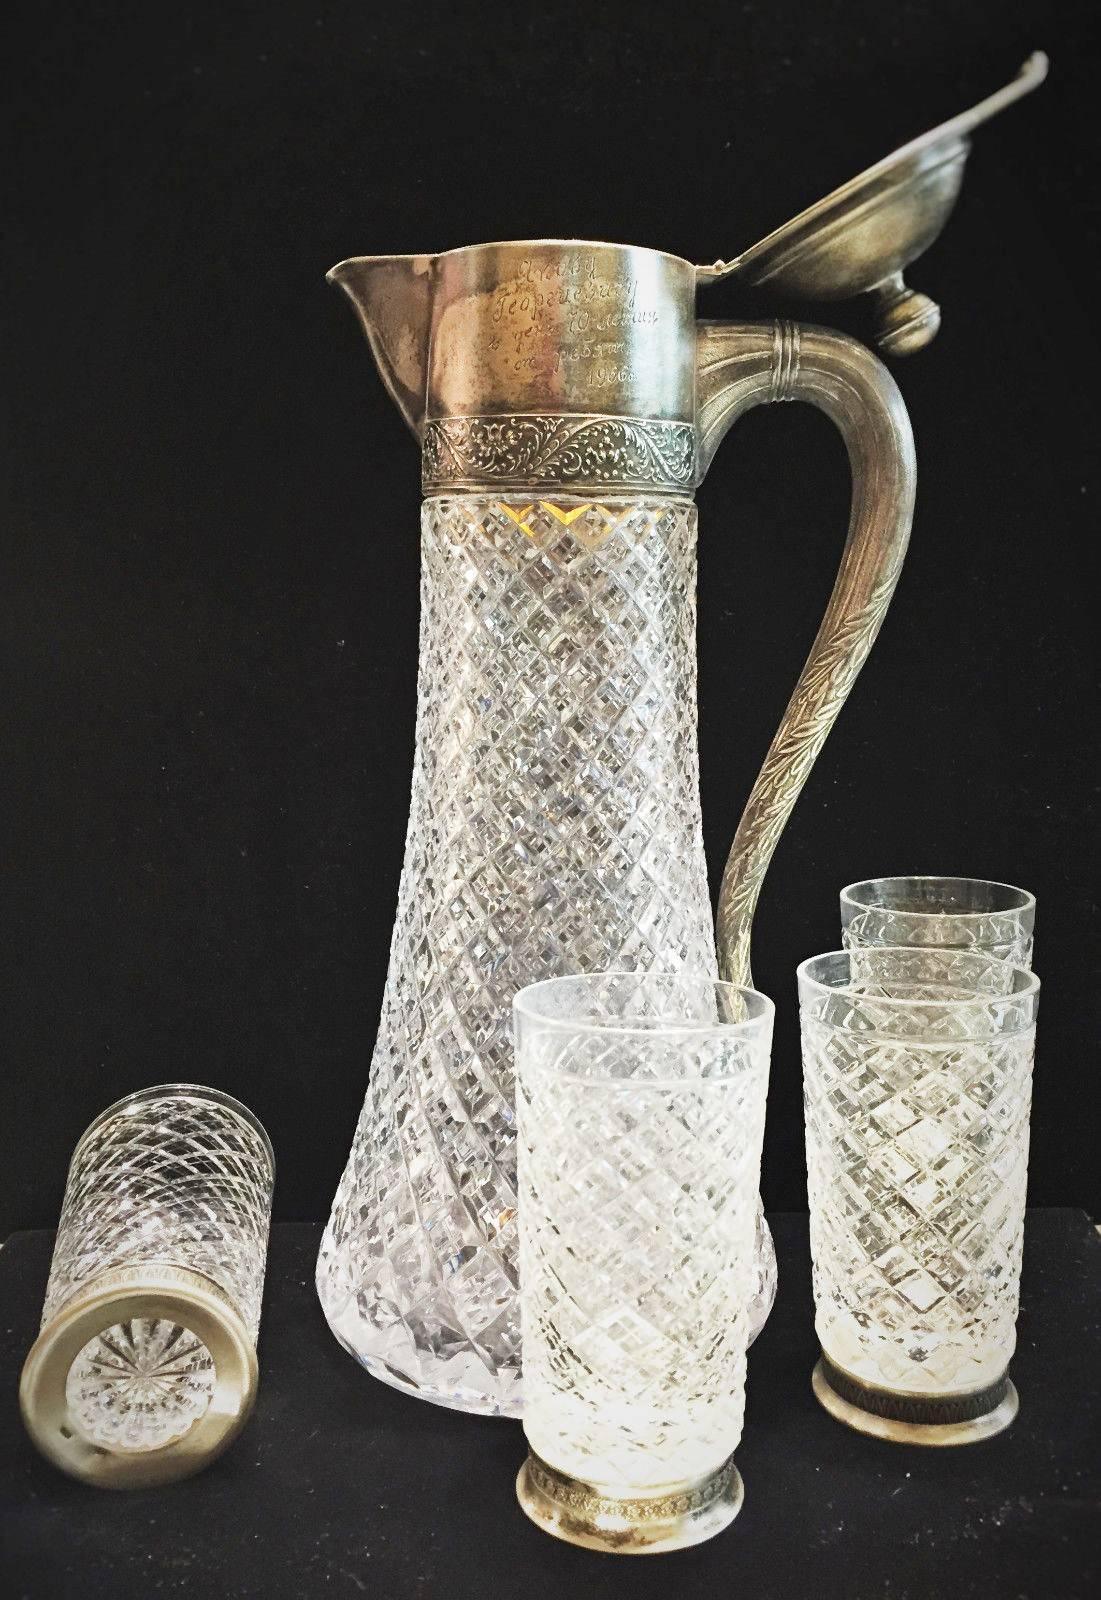 This elegant vintage Soviet Russian cut crystal and silver set of wine pitcher and twelve glasses consists of a tall pitcher with the gold-plated inner part of the neck and cover and twelve matching glasses with the silver rim featuring repeating